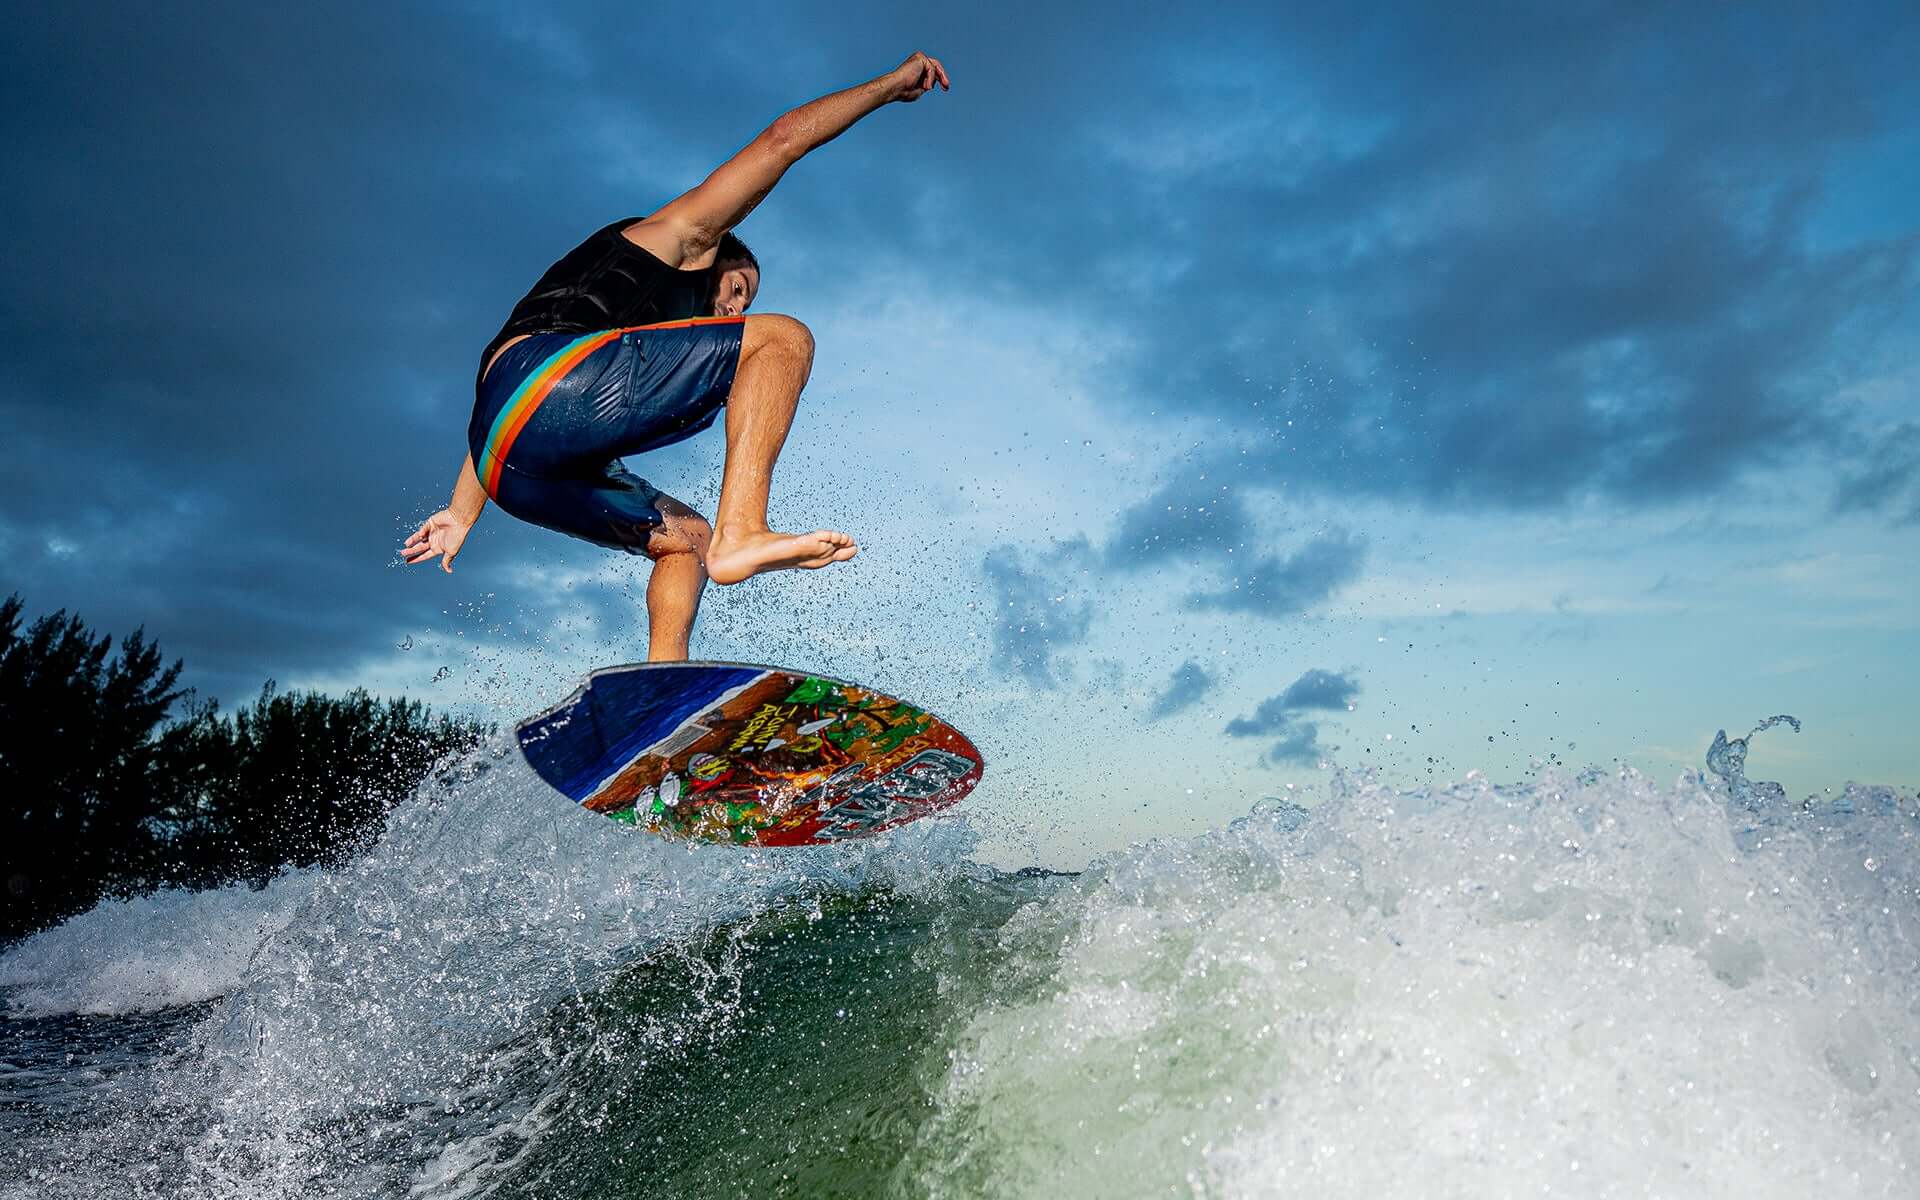 A man is riding a wave on a Phase 5 2024 MVP LTD Wakesurf Board, achieving an impressive skim style riding experience.